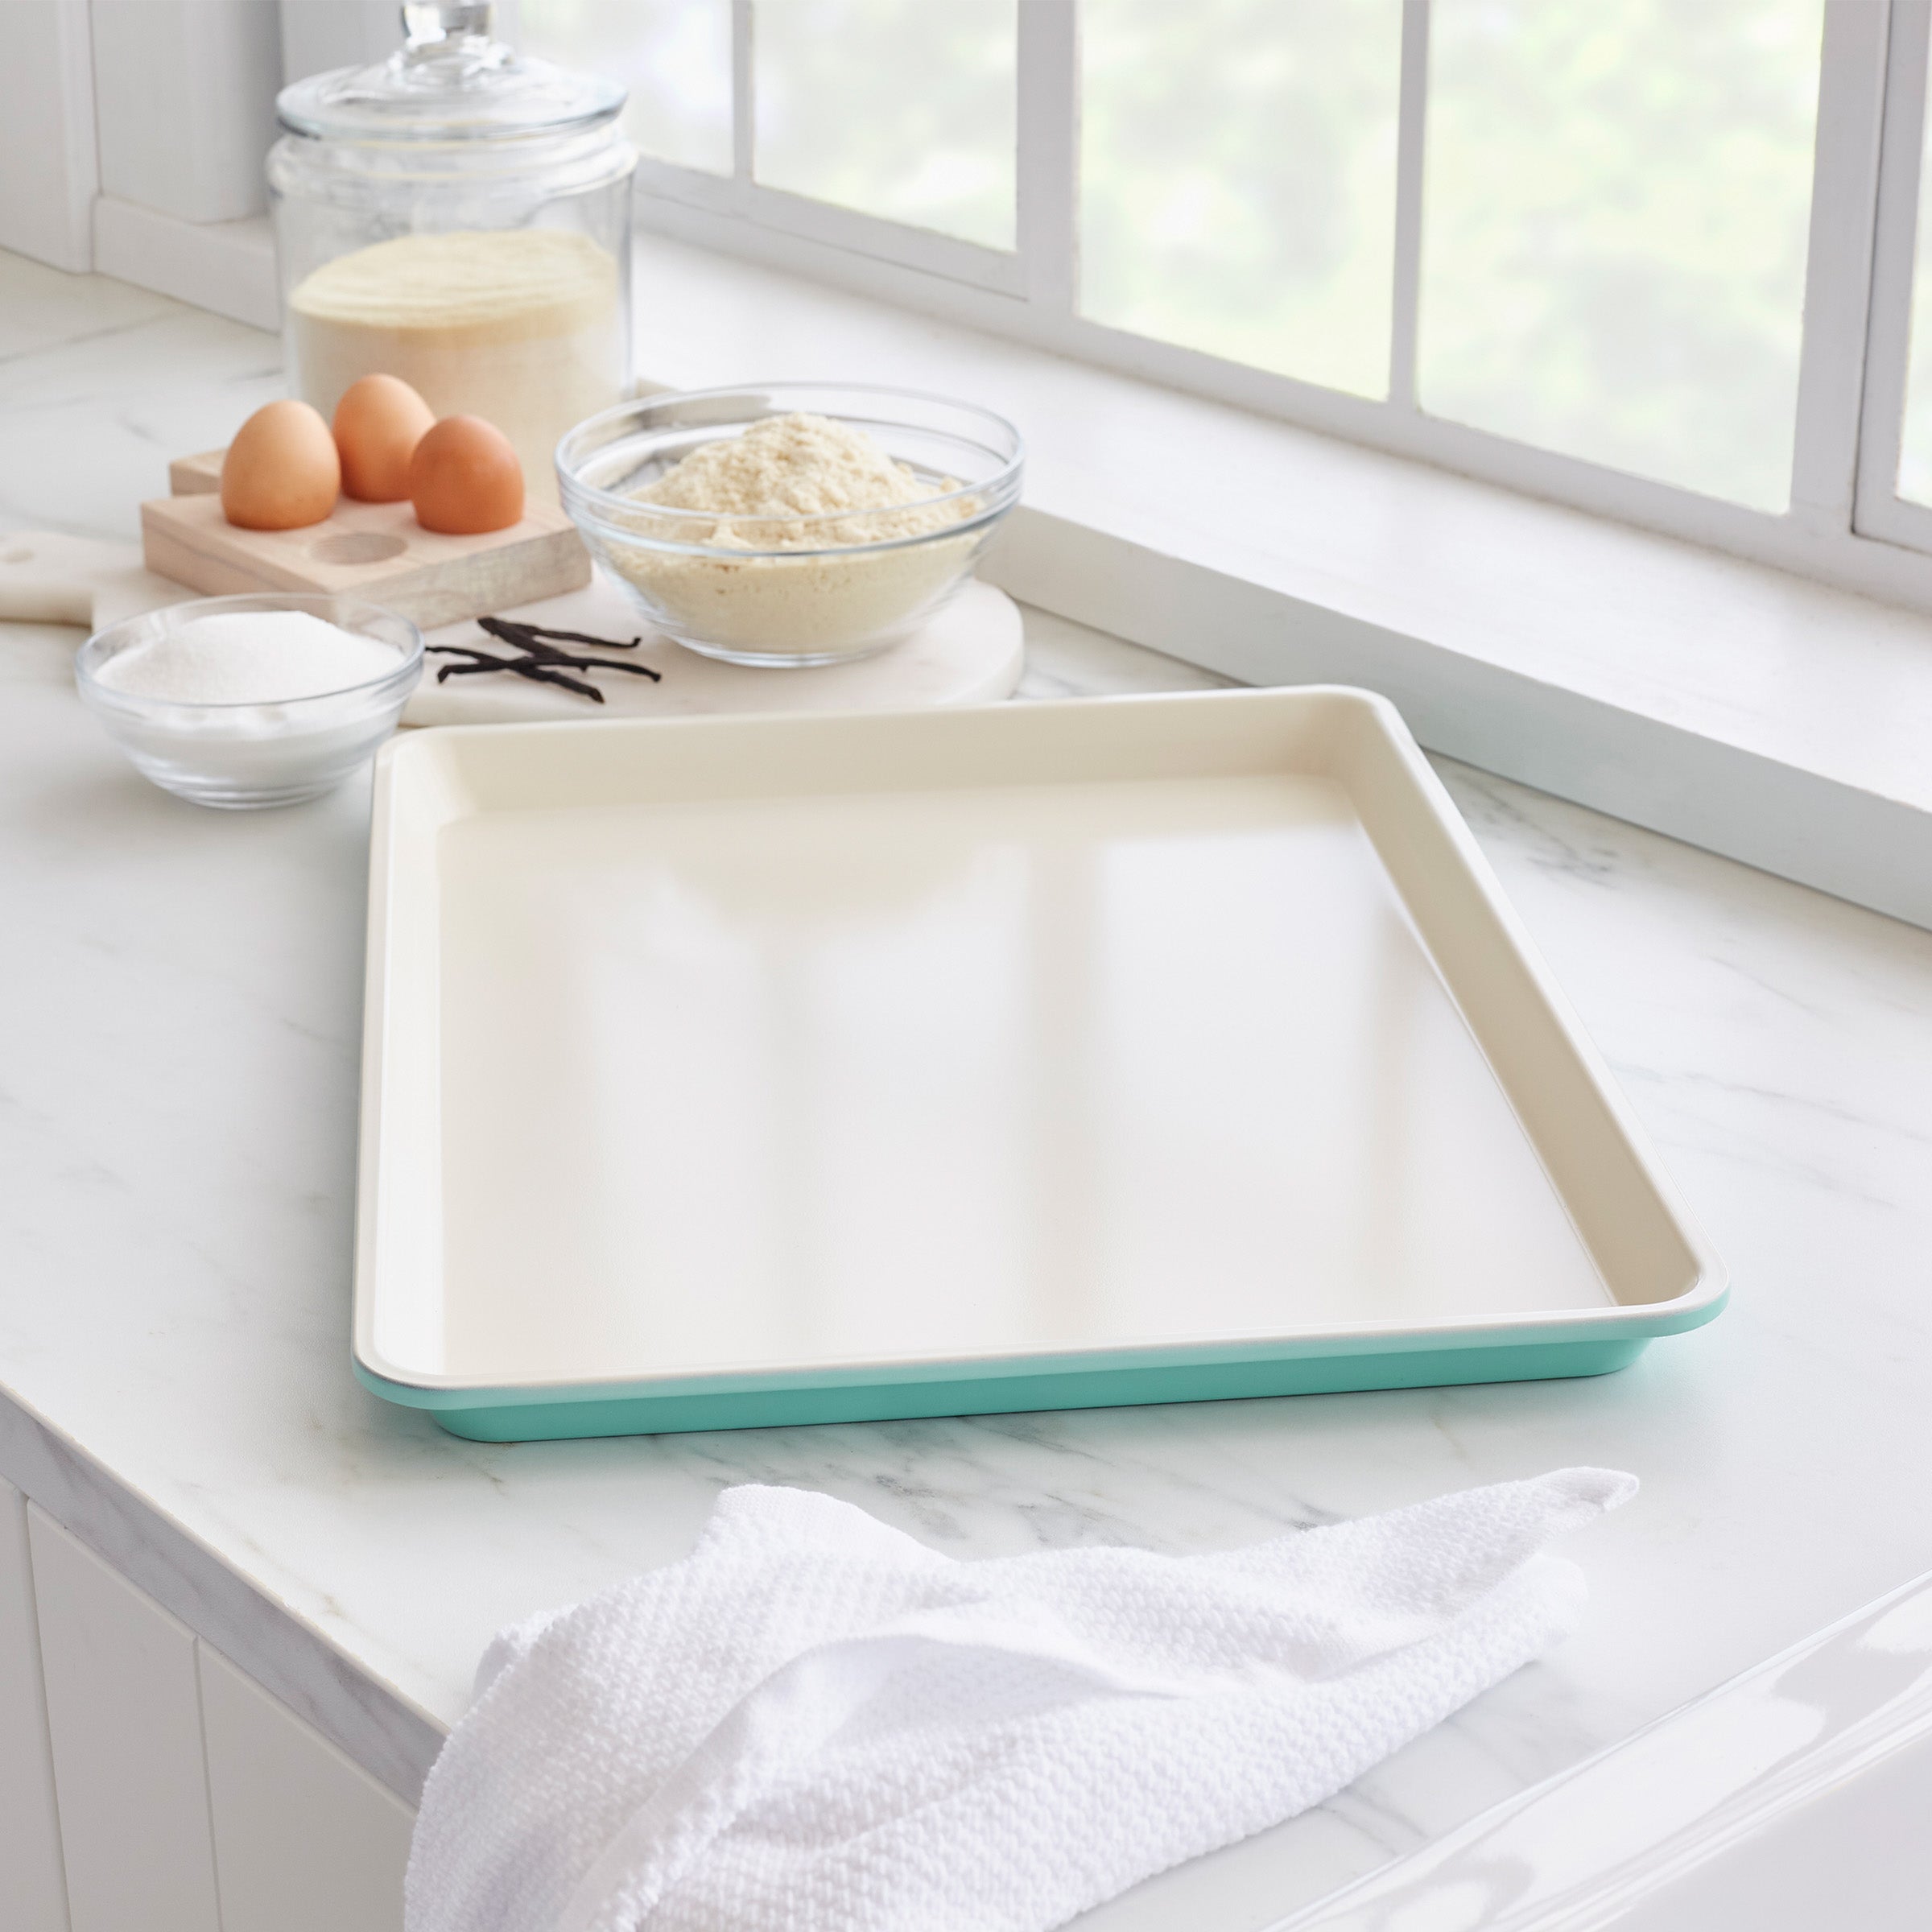 Contour Turquoise Cookie Sheet